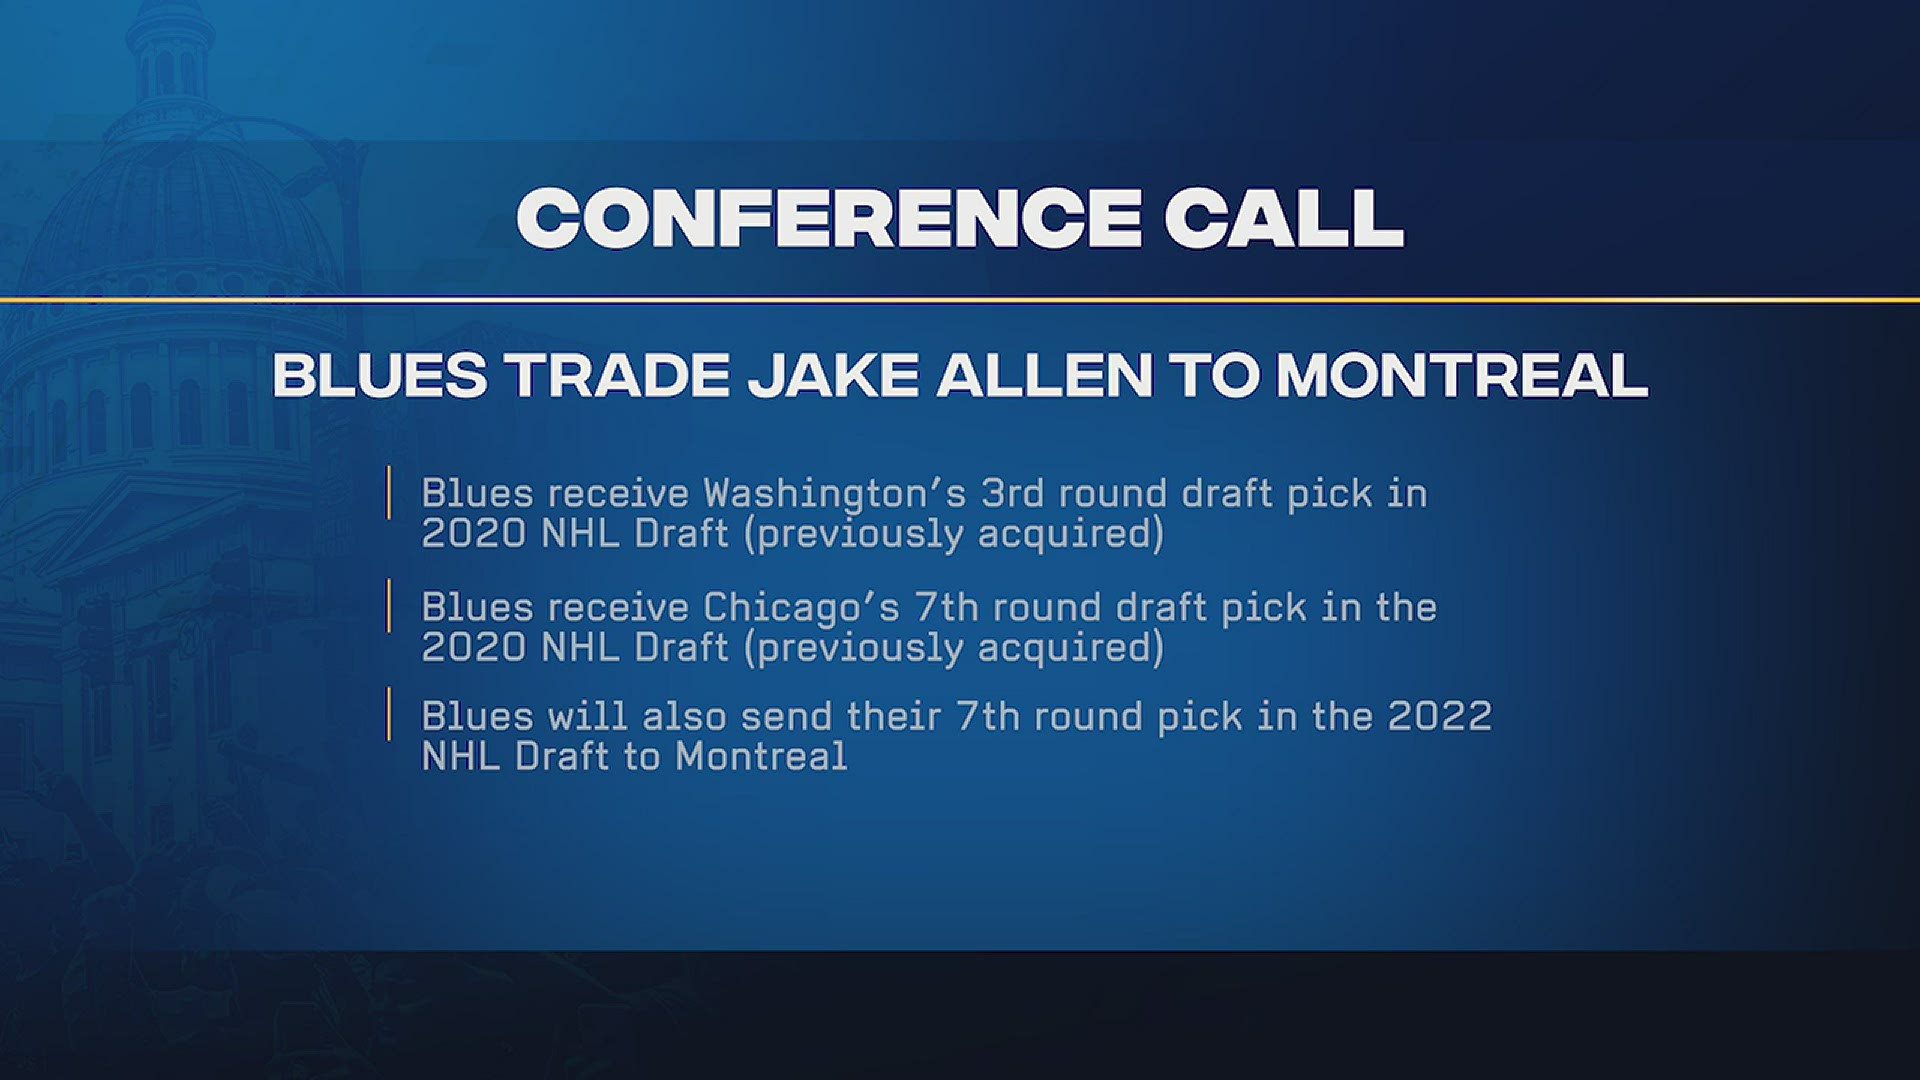 The St. Louis Blues have traded goaltender Jake Allen to the Montreal Canadiens, the team announced Wednesday.